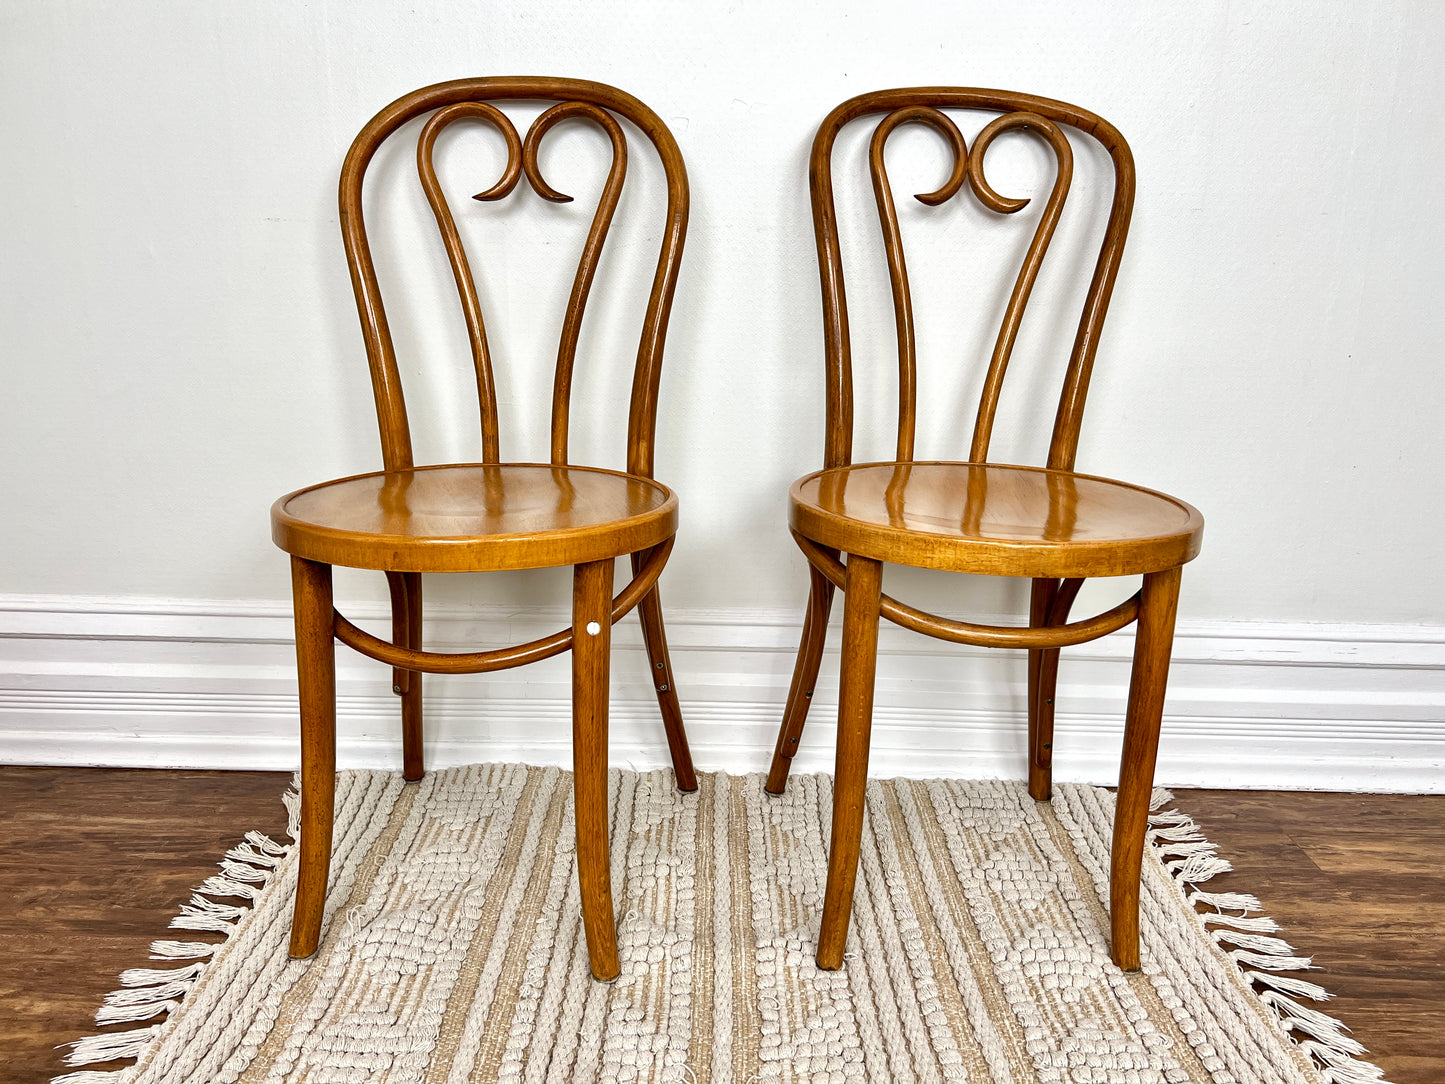 The Constanta Chairs